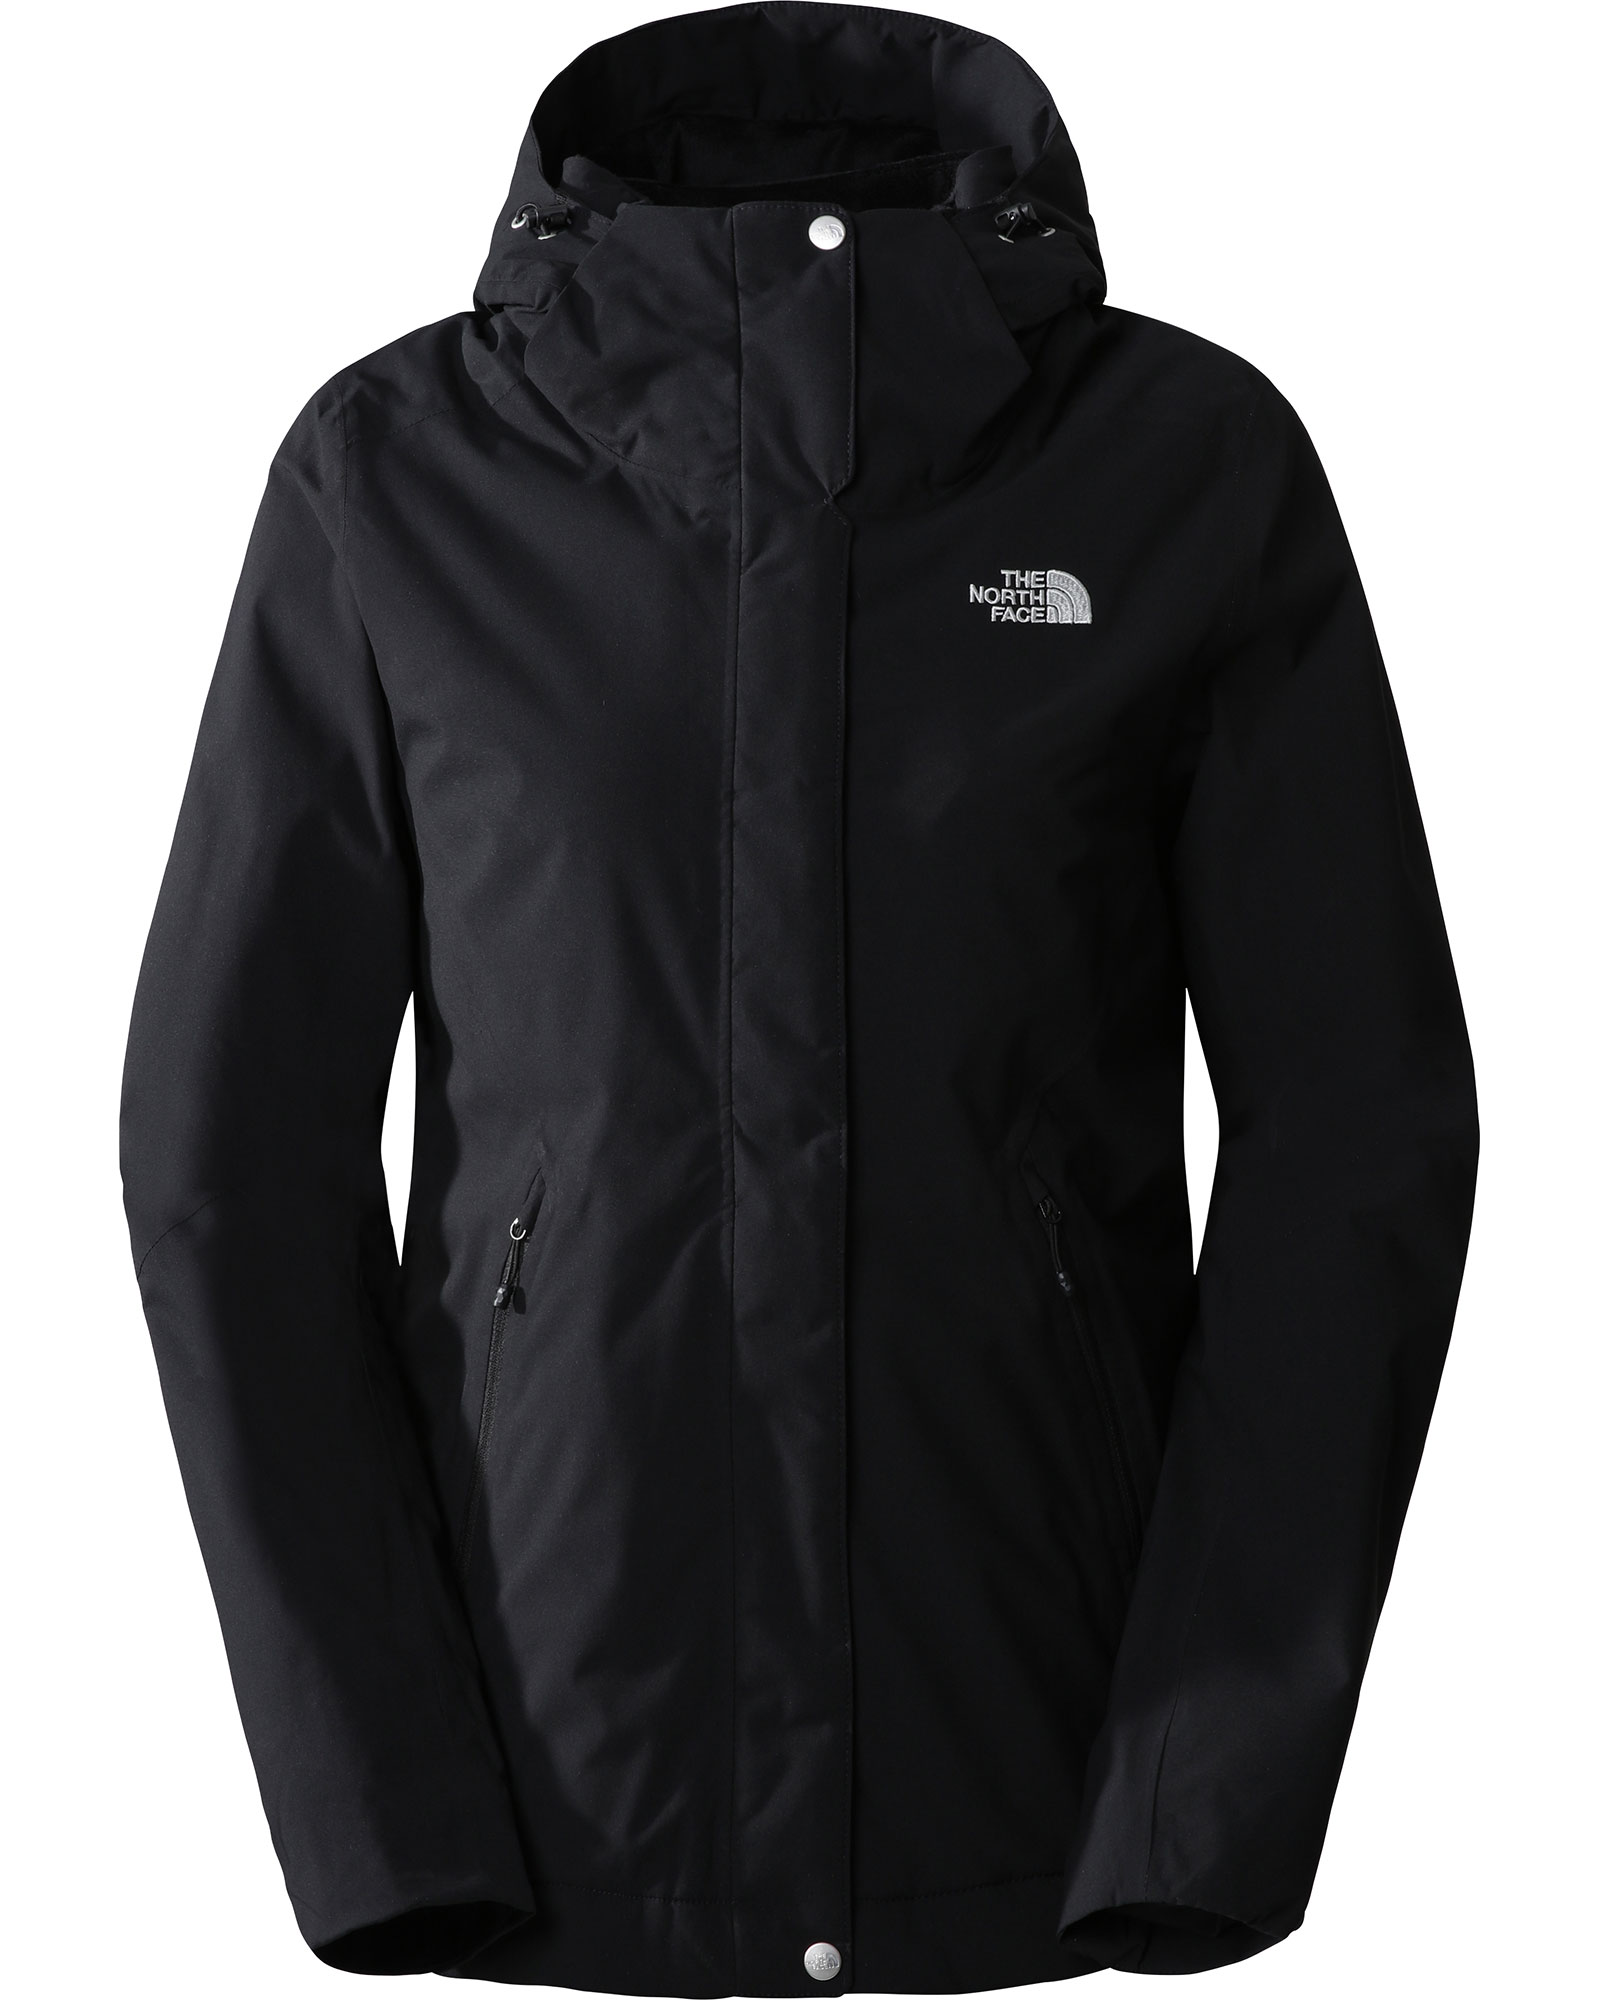 The North Face Inlux Insulated DryVent Women’s Insulated Jacket - TNF Black L